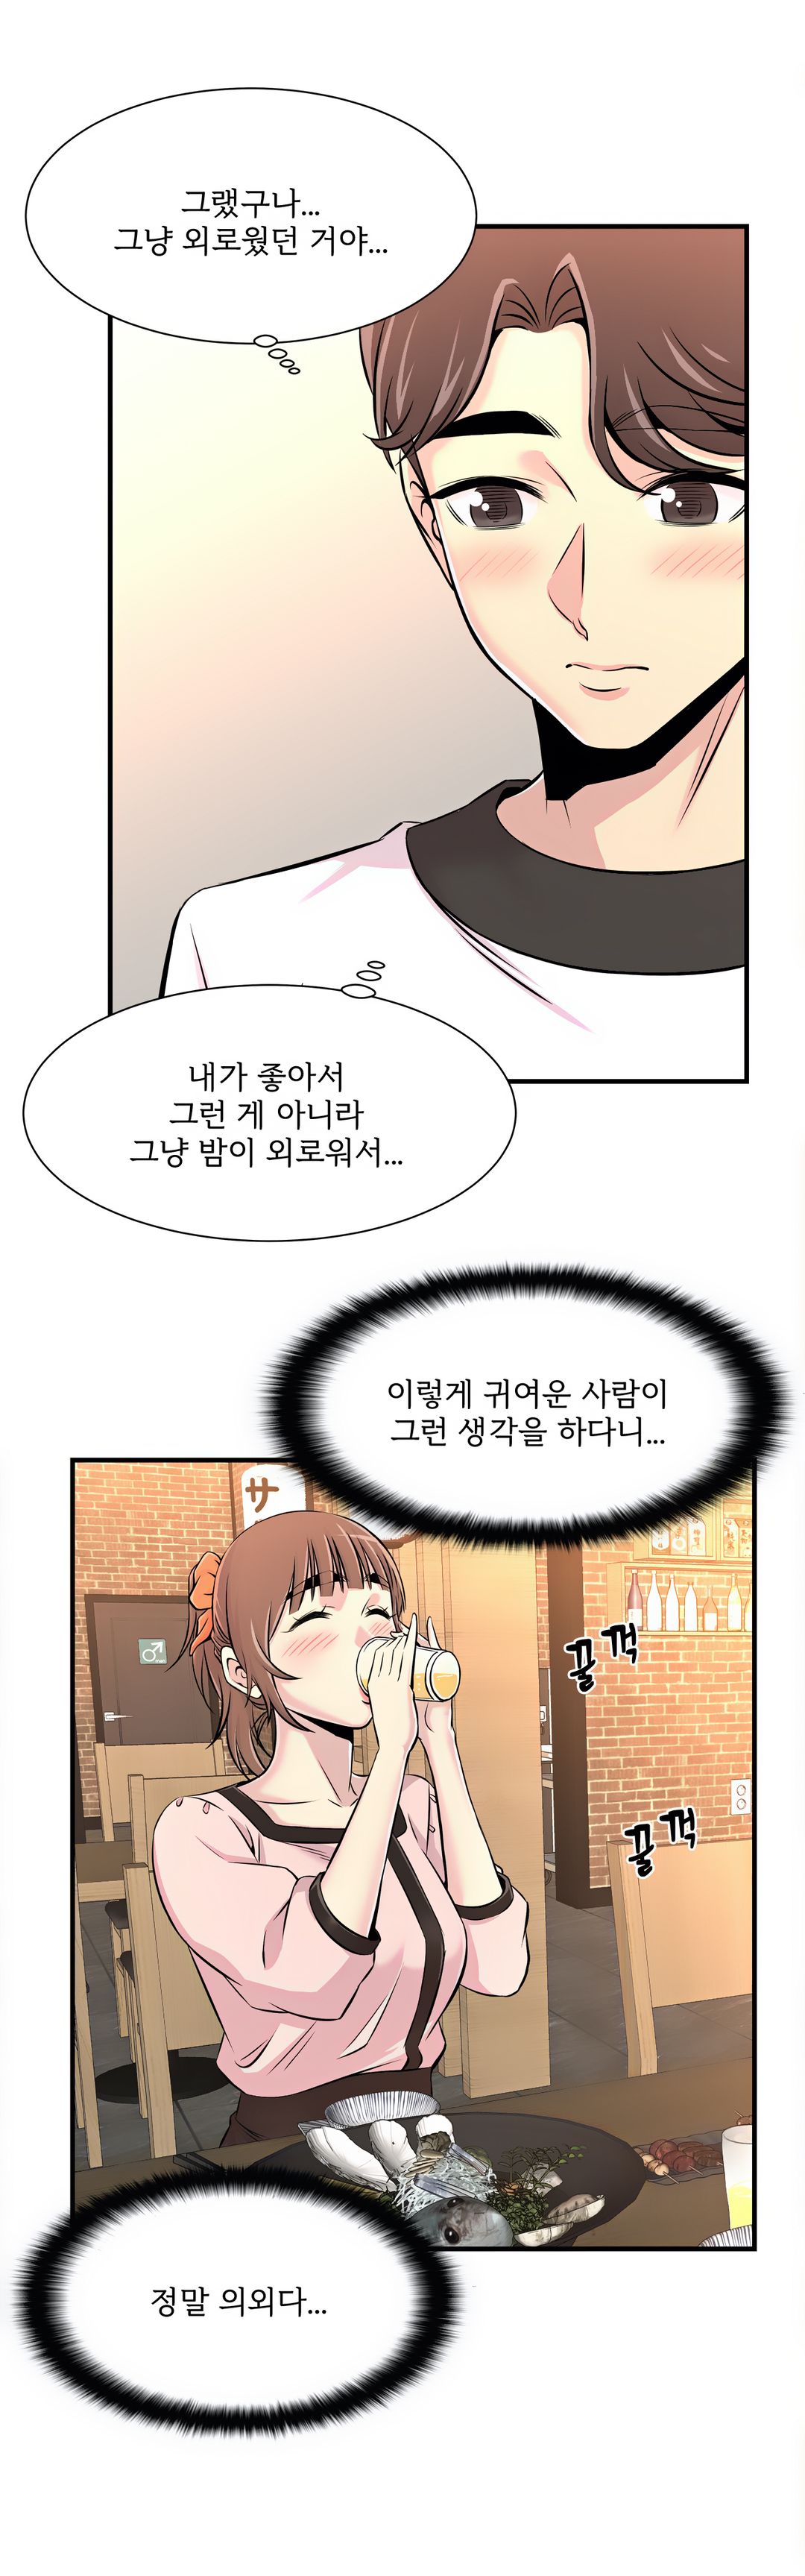 Cram School Scandal Raw - Chapter 11 Page 12